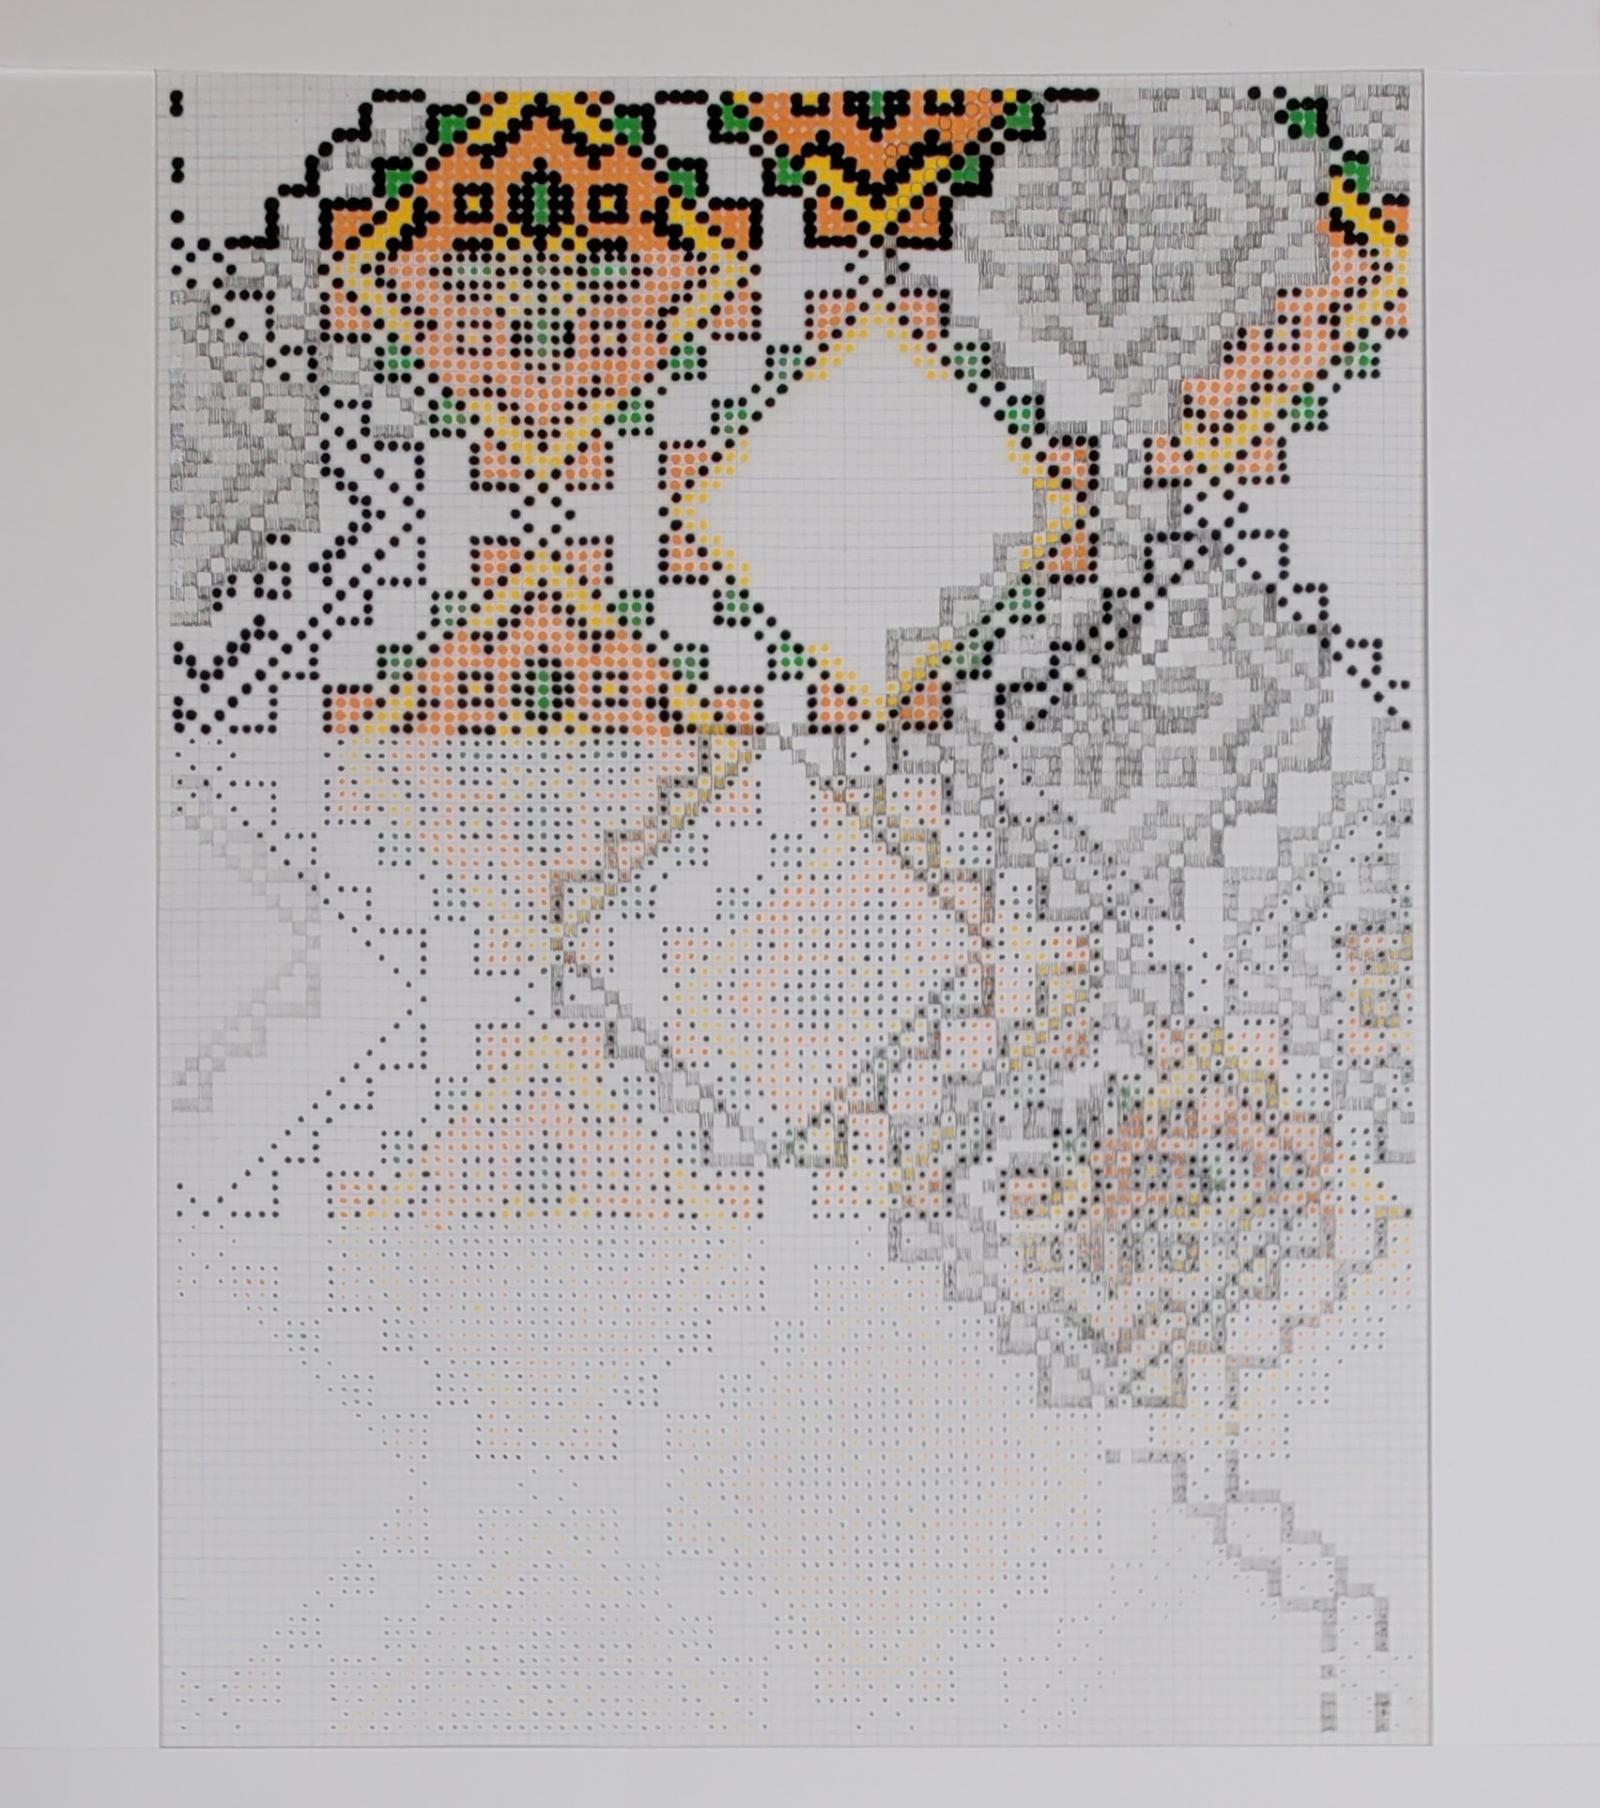 This pattern is based off my family’s Hutsul culture and is laid out in a repetition that would never be seen historically. I then intertwined a gray shadow version of the pattern. I used gridded paper and kept the scale small as a direct reference to the way embroidery patterns are recorded and passed down in many cultures.